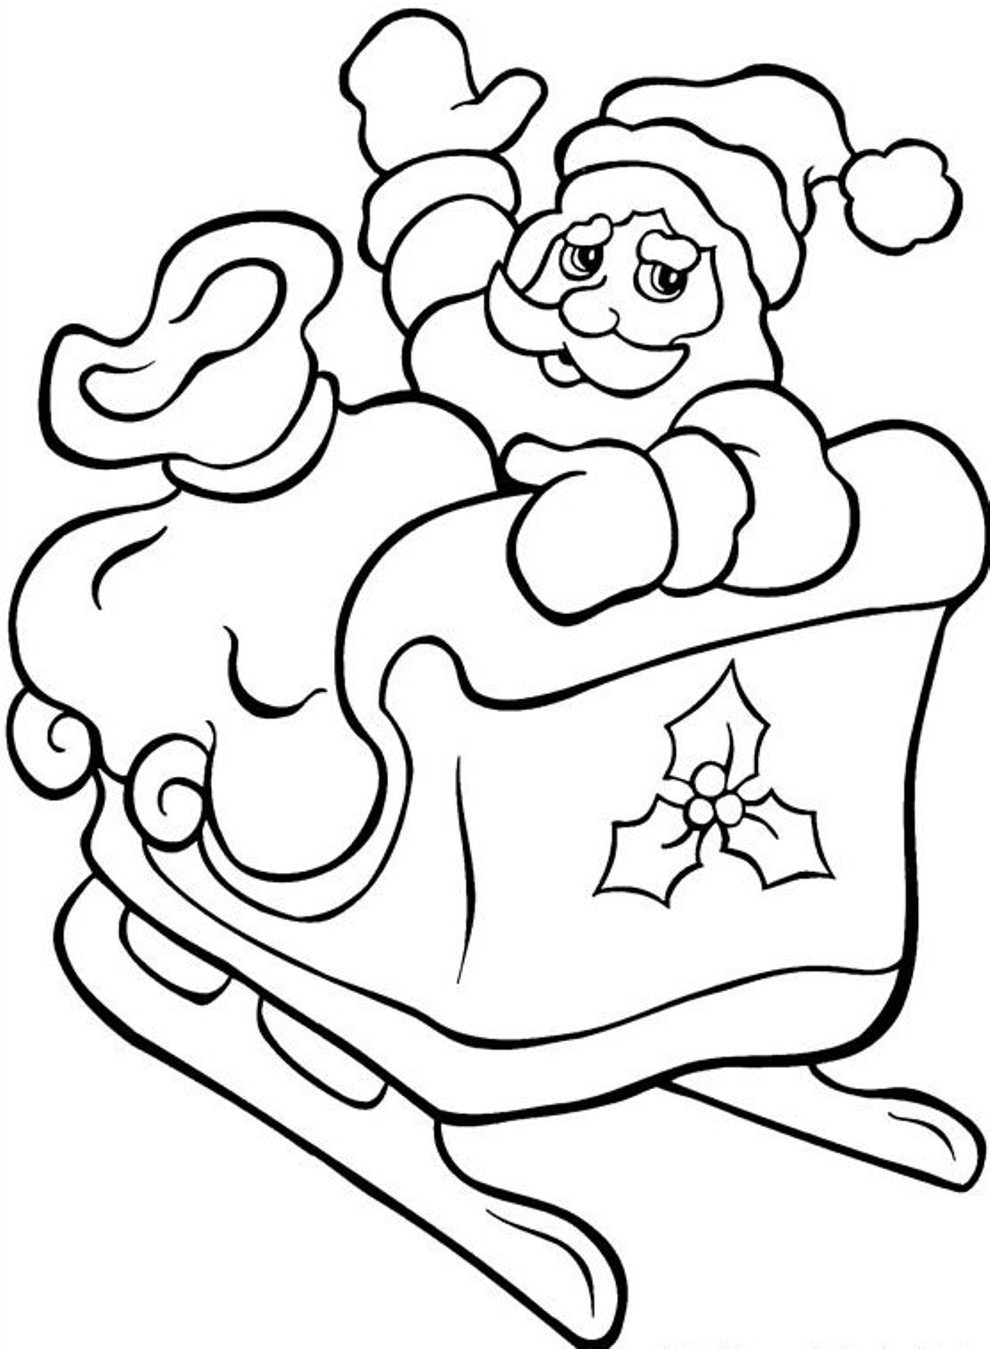 Santa Claus In Sleigh Coloring Page Printable Coloring Pages Christmas Santa With His Sleigh Christmas